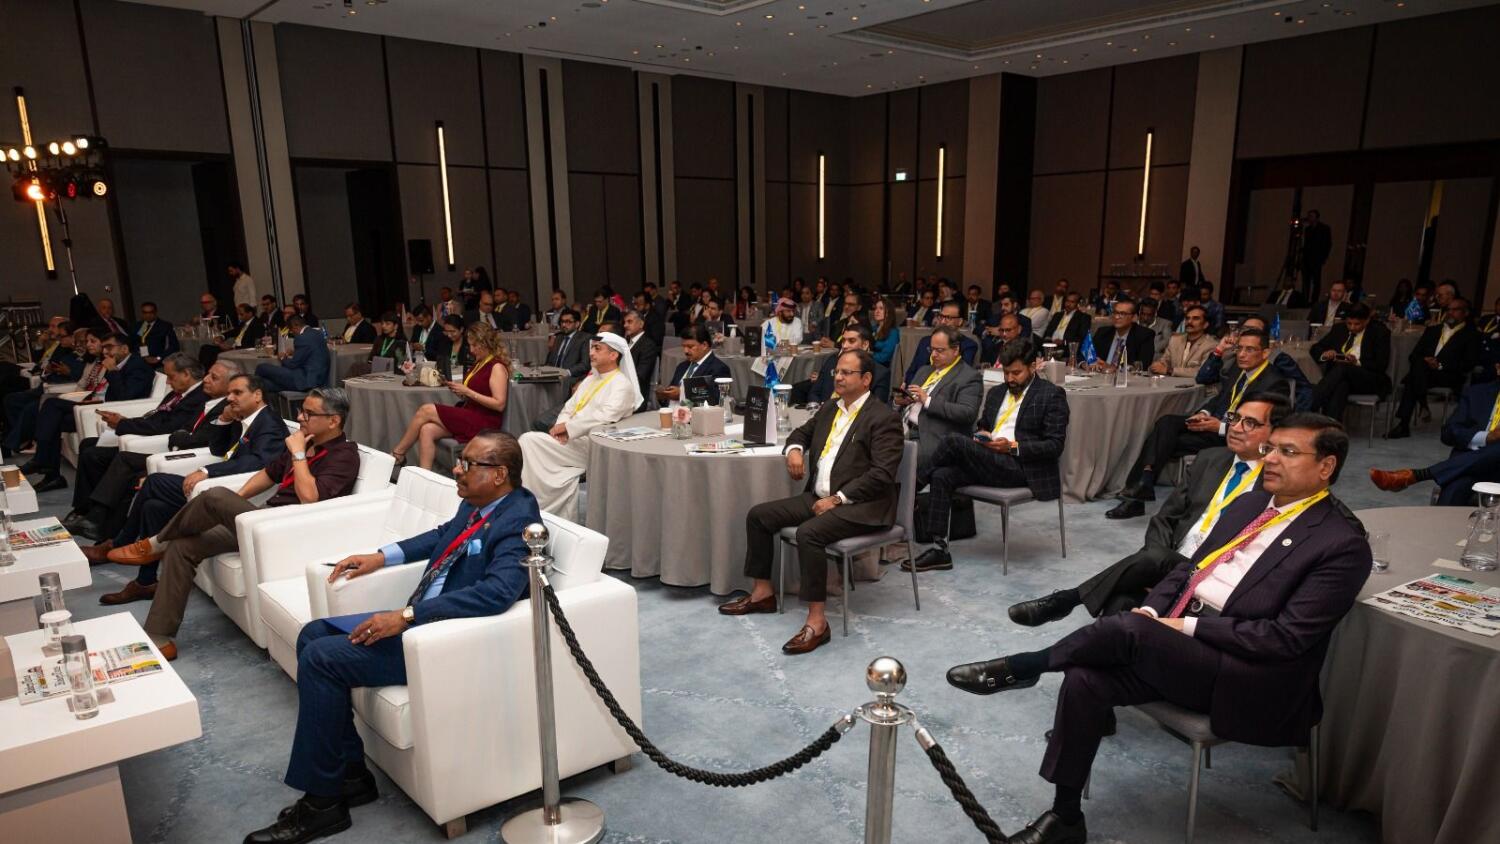 Diplomats, businessmen and professionals attentively listen to Dr Tharoor’s keynote address at the i3 conference in Dubai.